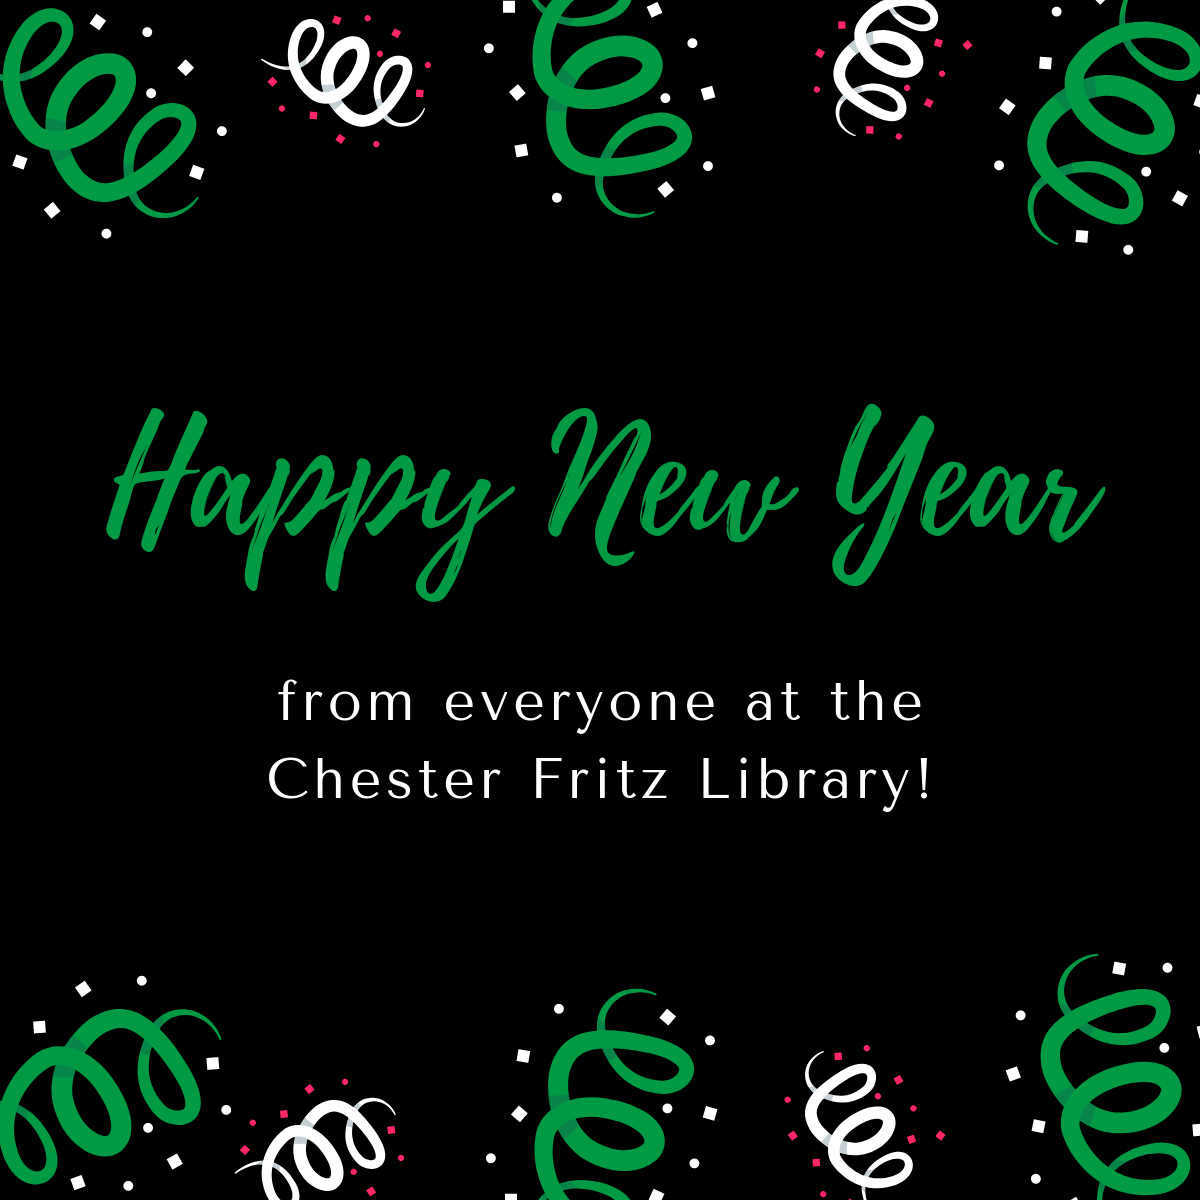 Happy New Year from everyone at the Chester Fritz Library!